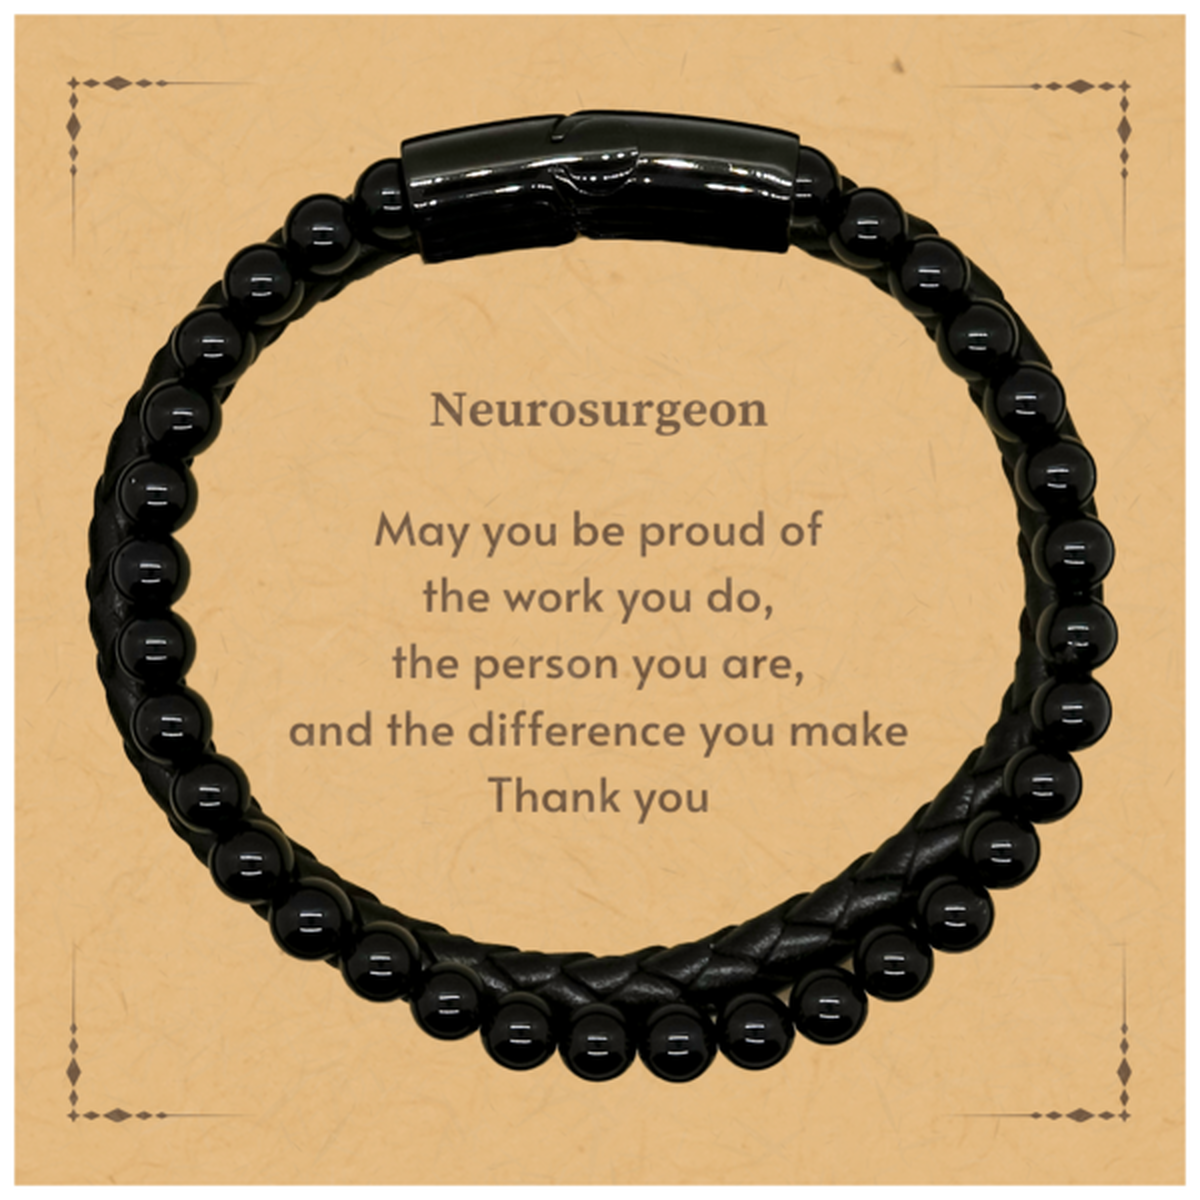 Heartwarming Stone Leather Bracelets Retirement Coworkers Gifts for Neurosurgeon, Neurosurgeon May You be proud of the work you do, the person you are Gifts for Boss Men Women Friends